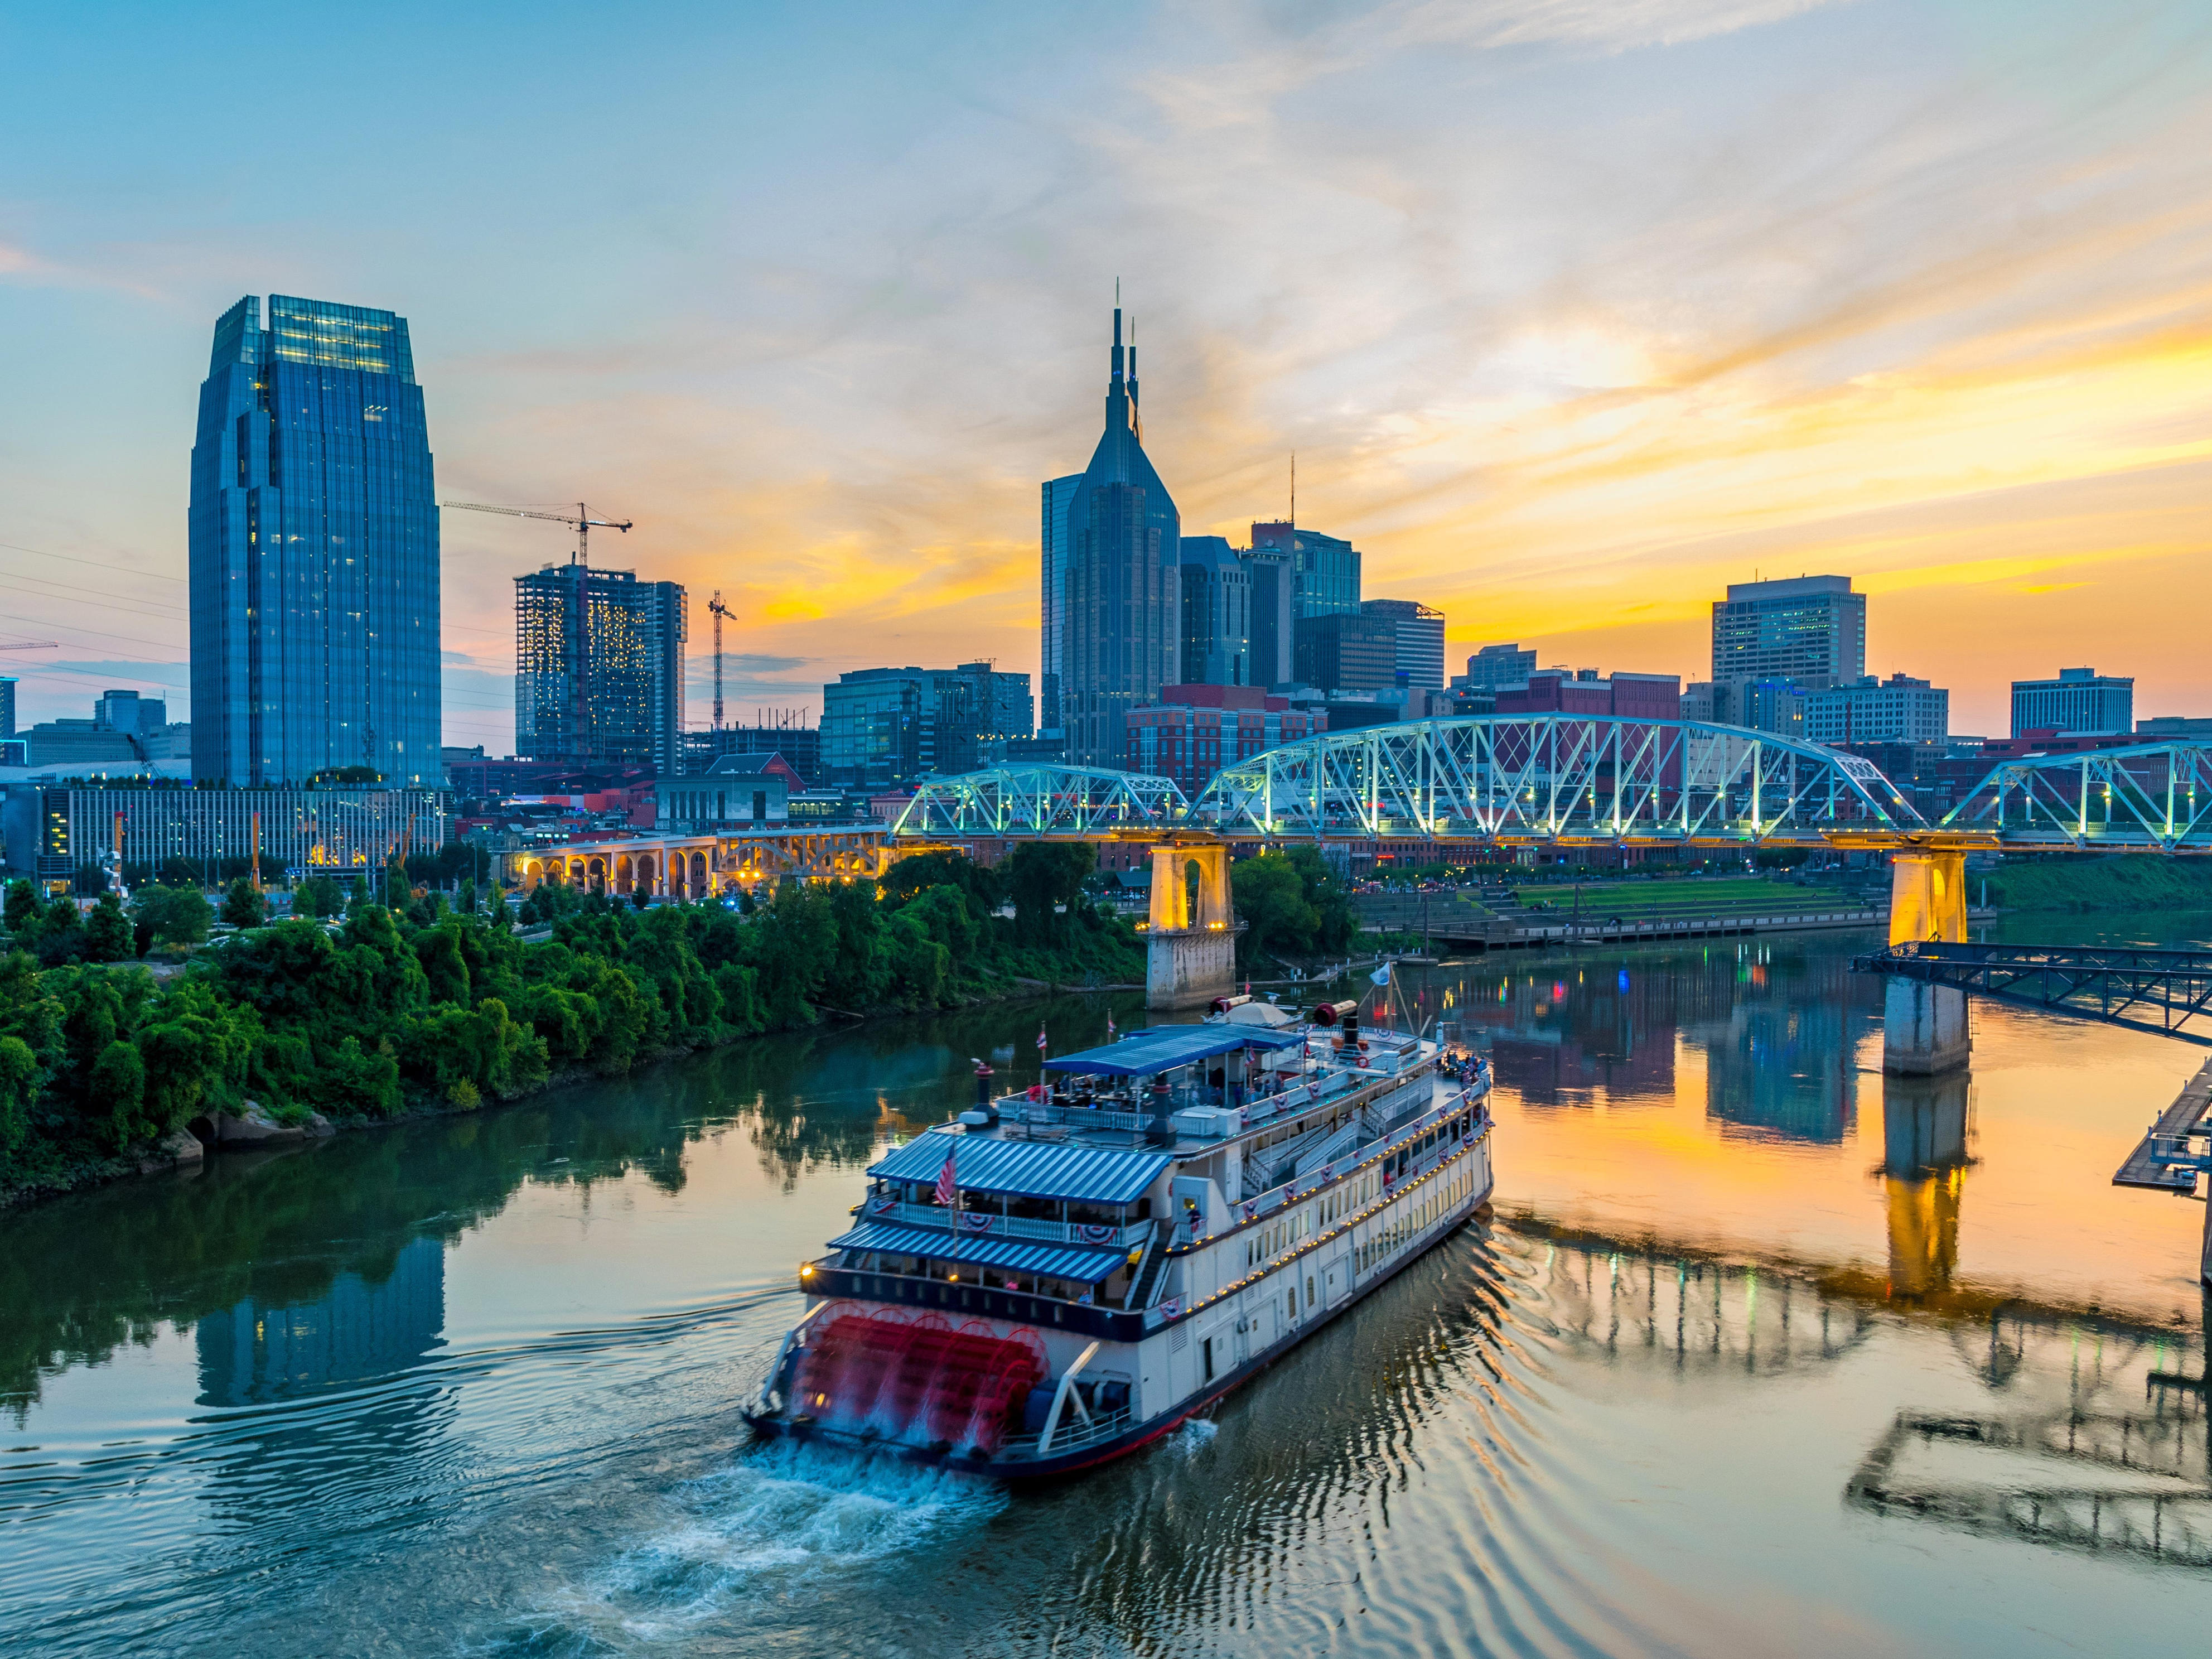 i'm a nashville local. it's expensive and overrun by tourists, but it's still the best city in the world.